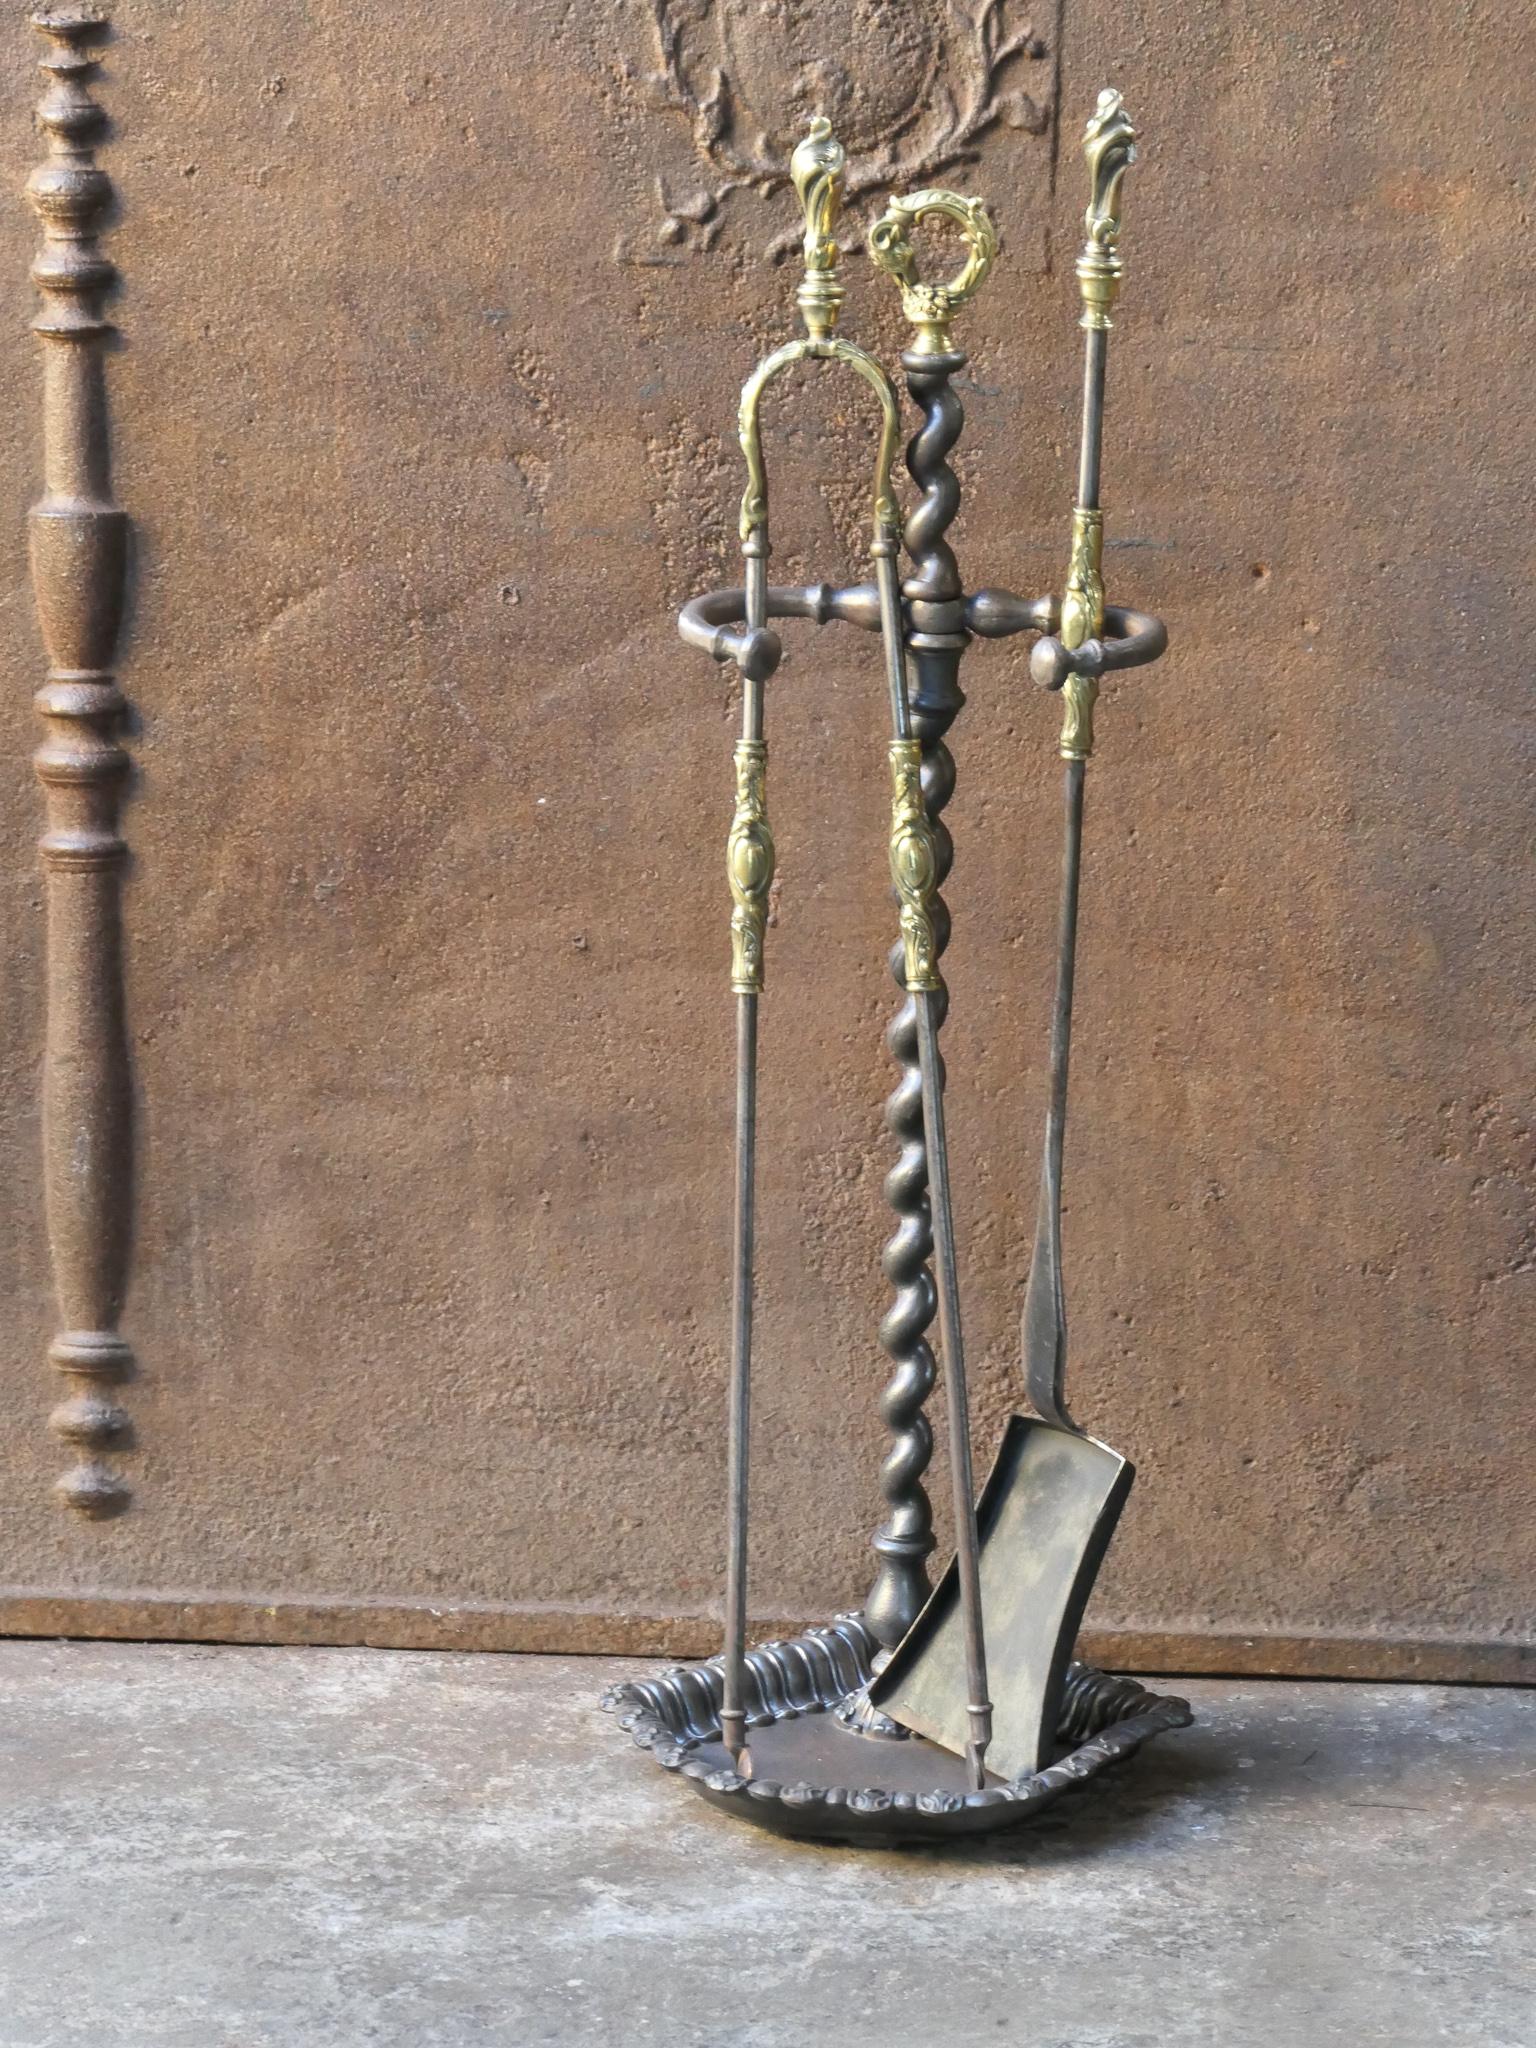 Beautiful 19th century French Napoleon III fireside companion set. The tool set consists of tongs, shovel and stand. The tools and stand are made of forged iron and are finely decorated with brass details. The base of the stand is made of cast iron.